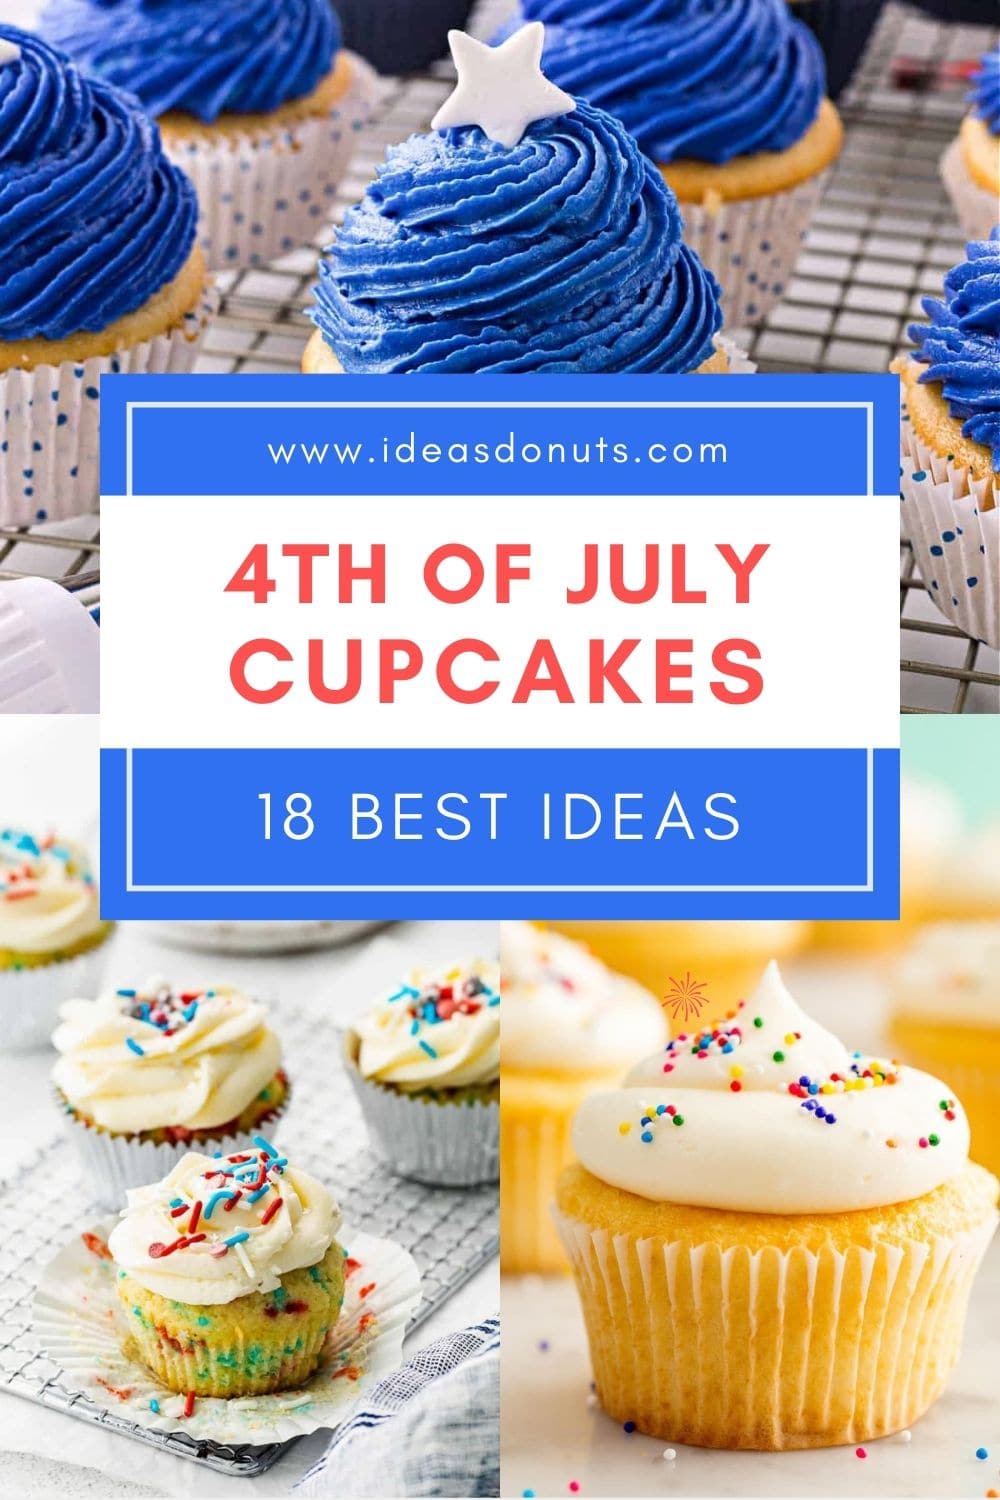 18 Amazing Cupcake Ideas To Celebrate The 4th Of July